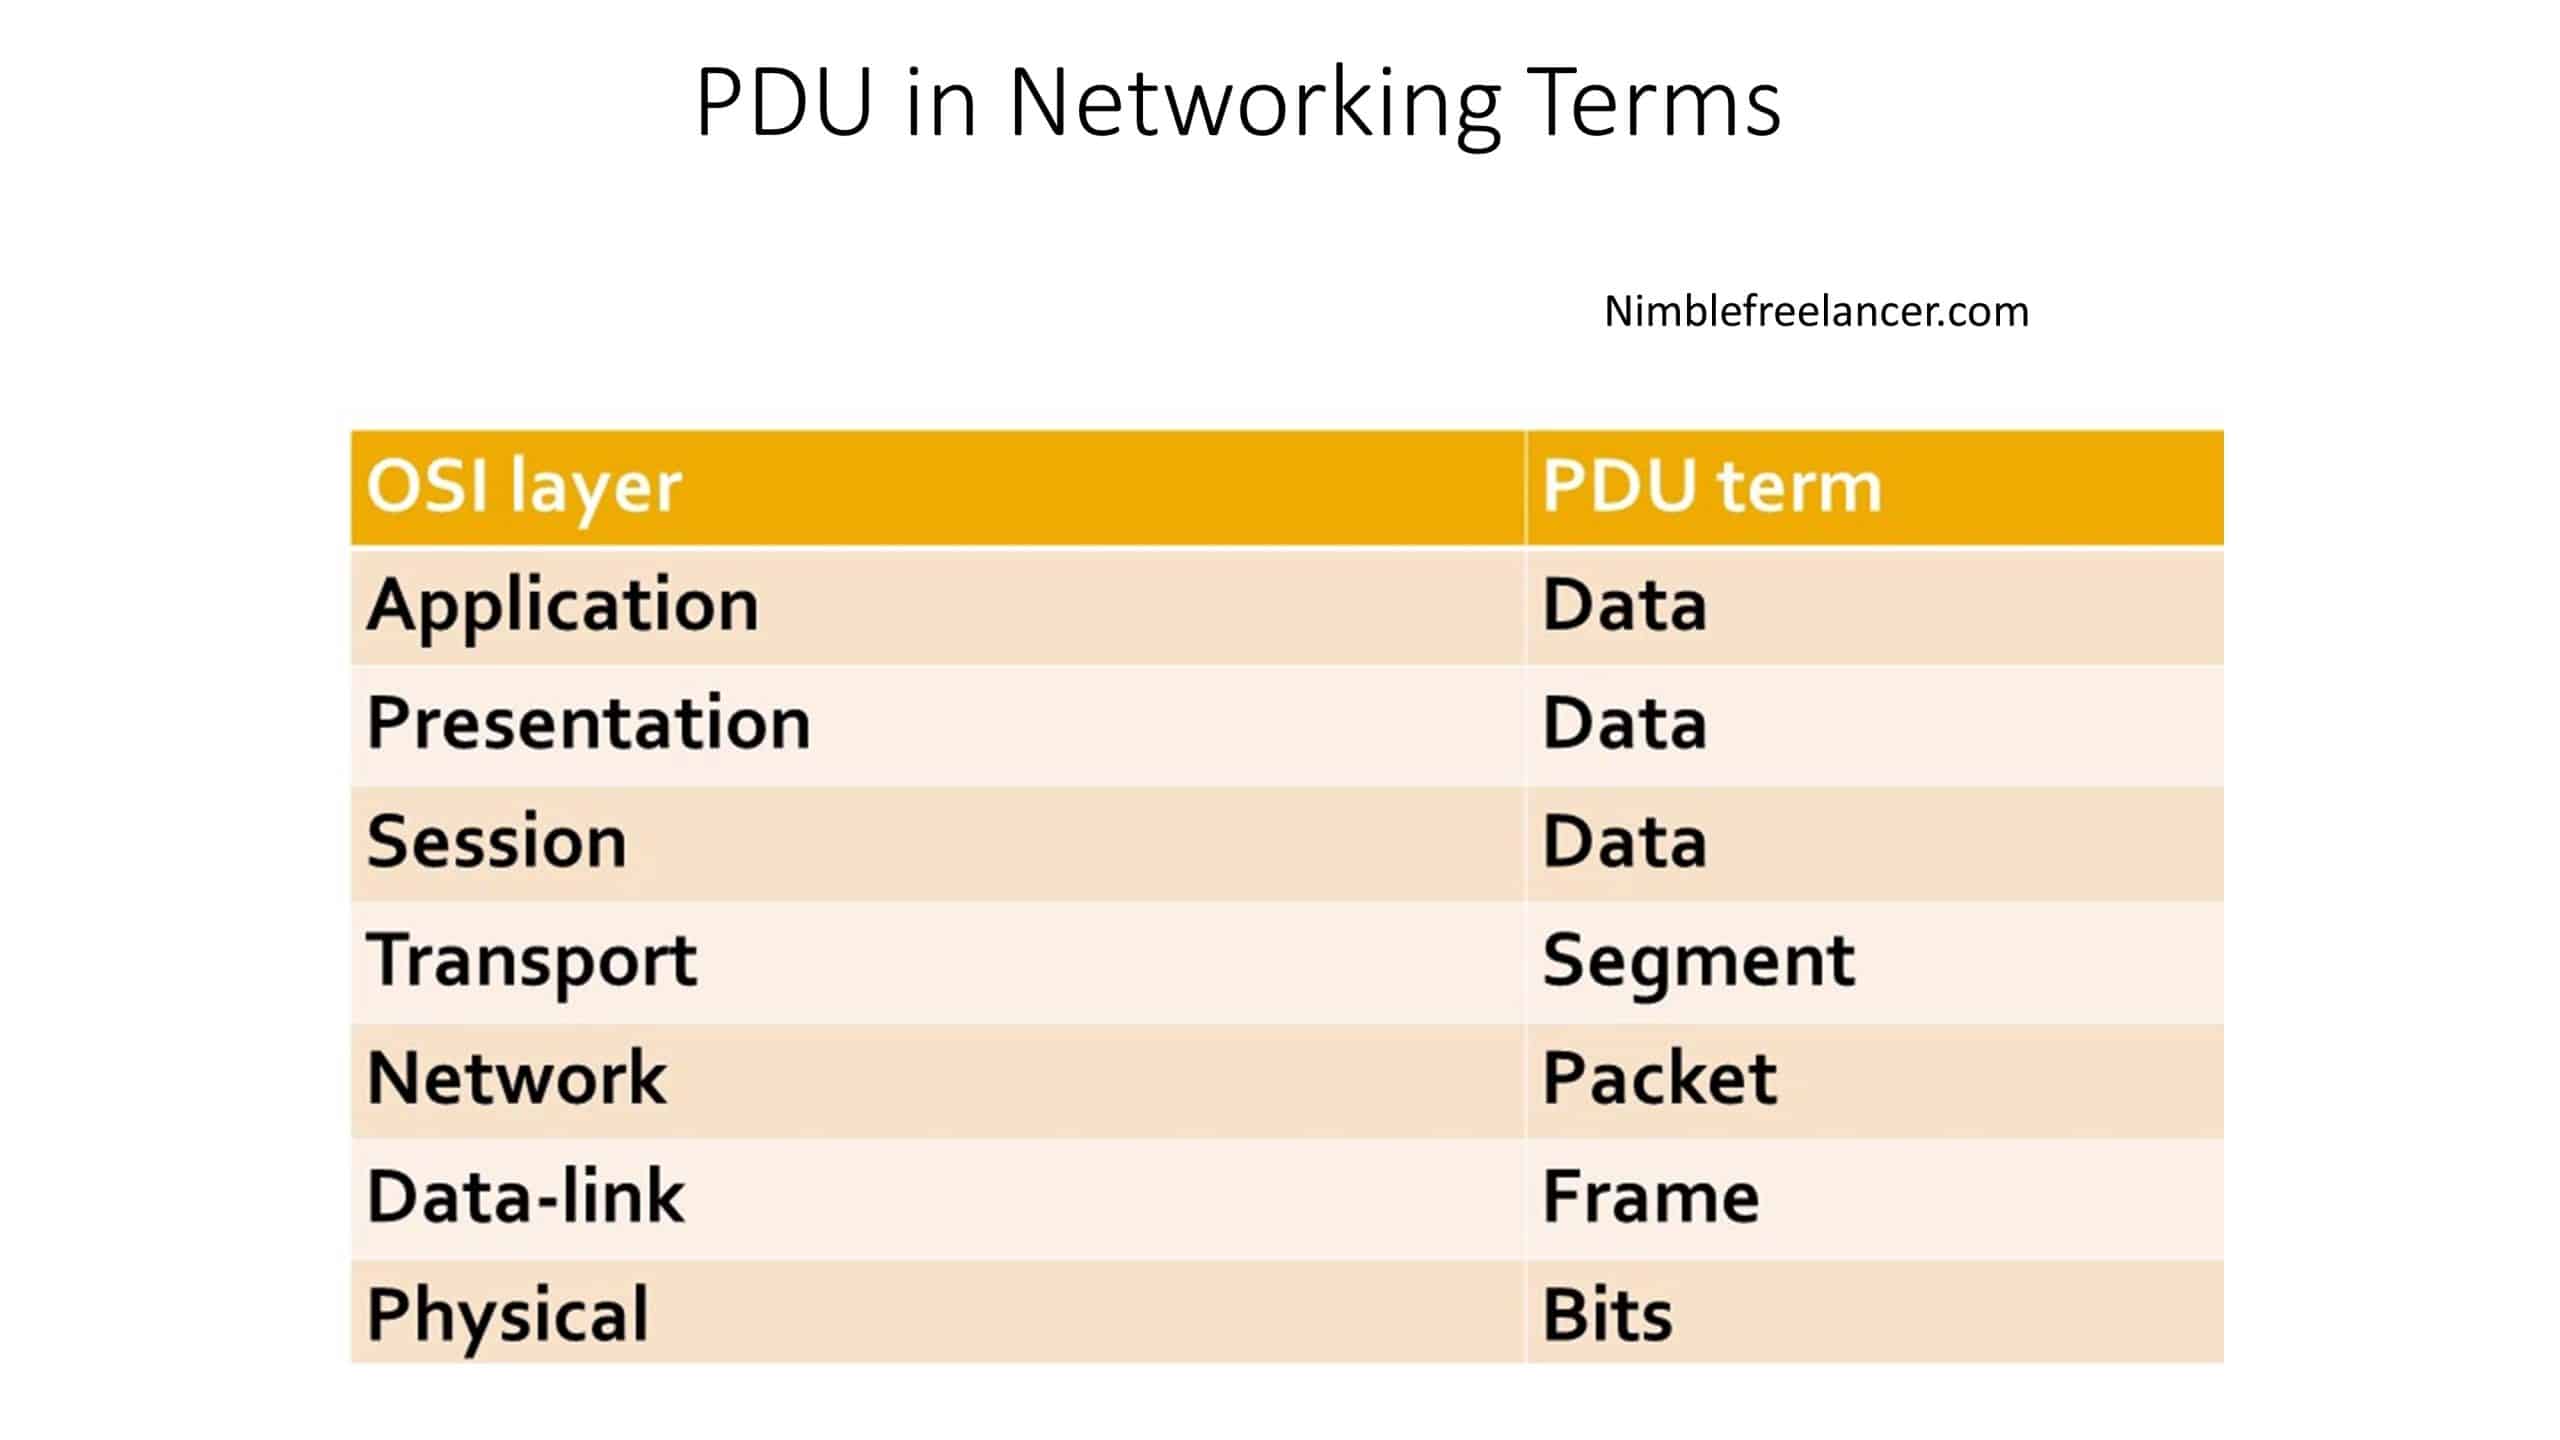 PDU in networking terms